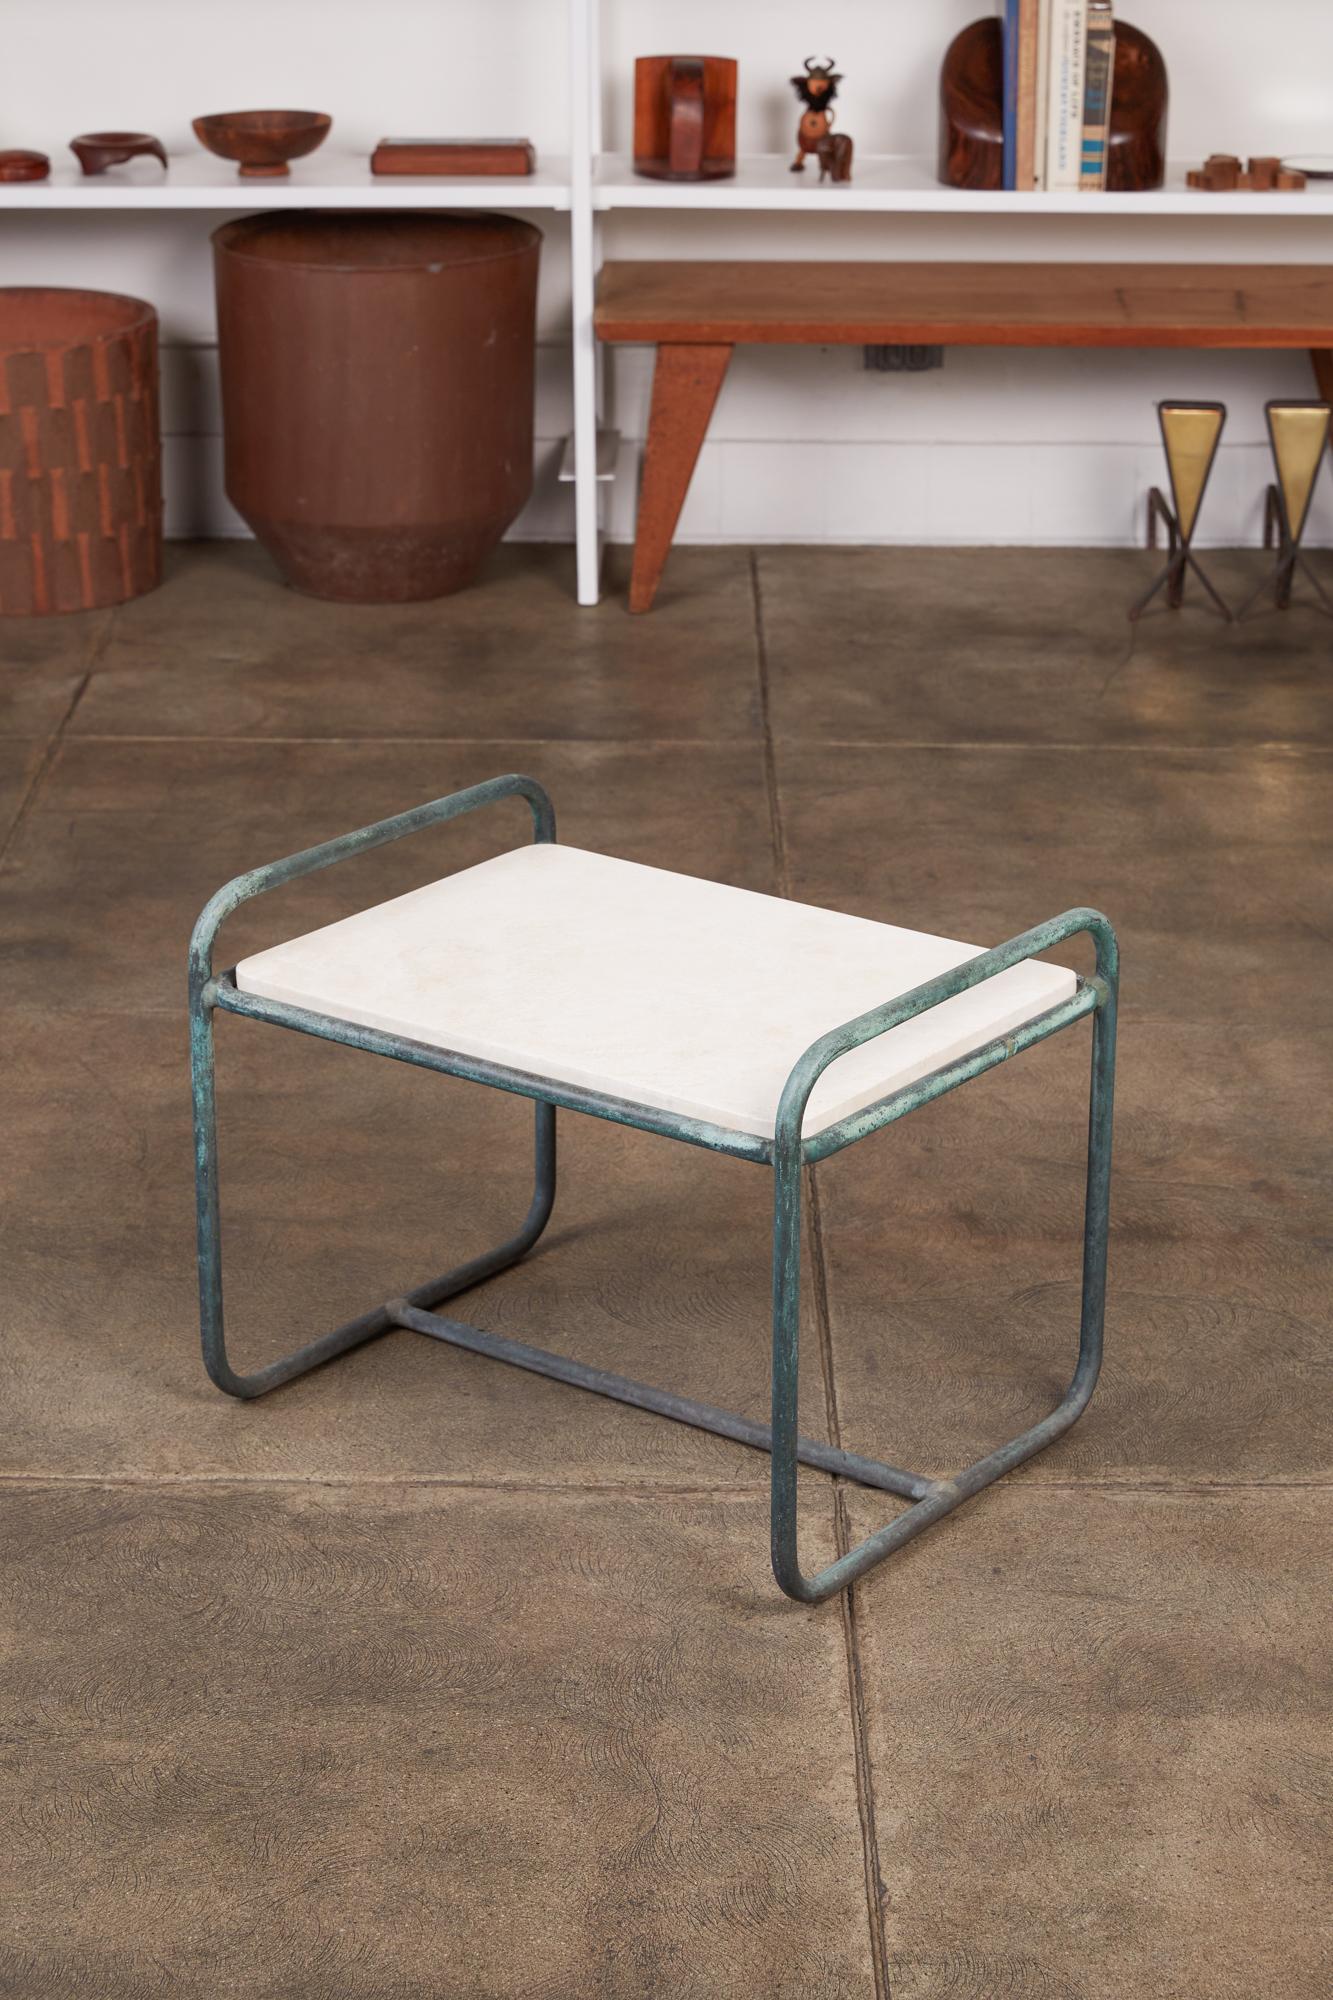 Patio side table designed by Walter Lamb and produced by Brown Jordan. The table frame is bronze tubing with a verdigris patina with new travertine top. Two curved rails form the legs and create the “handles” on either side of the table